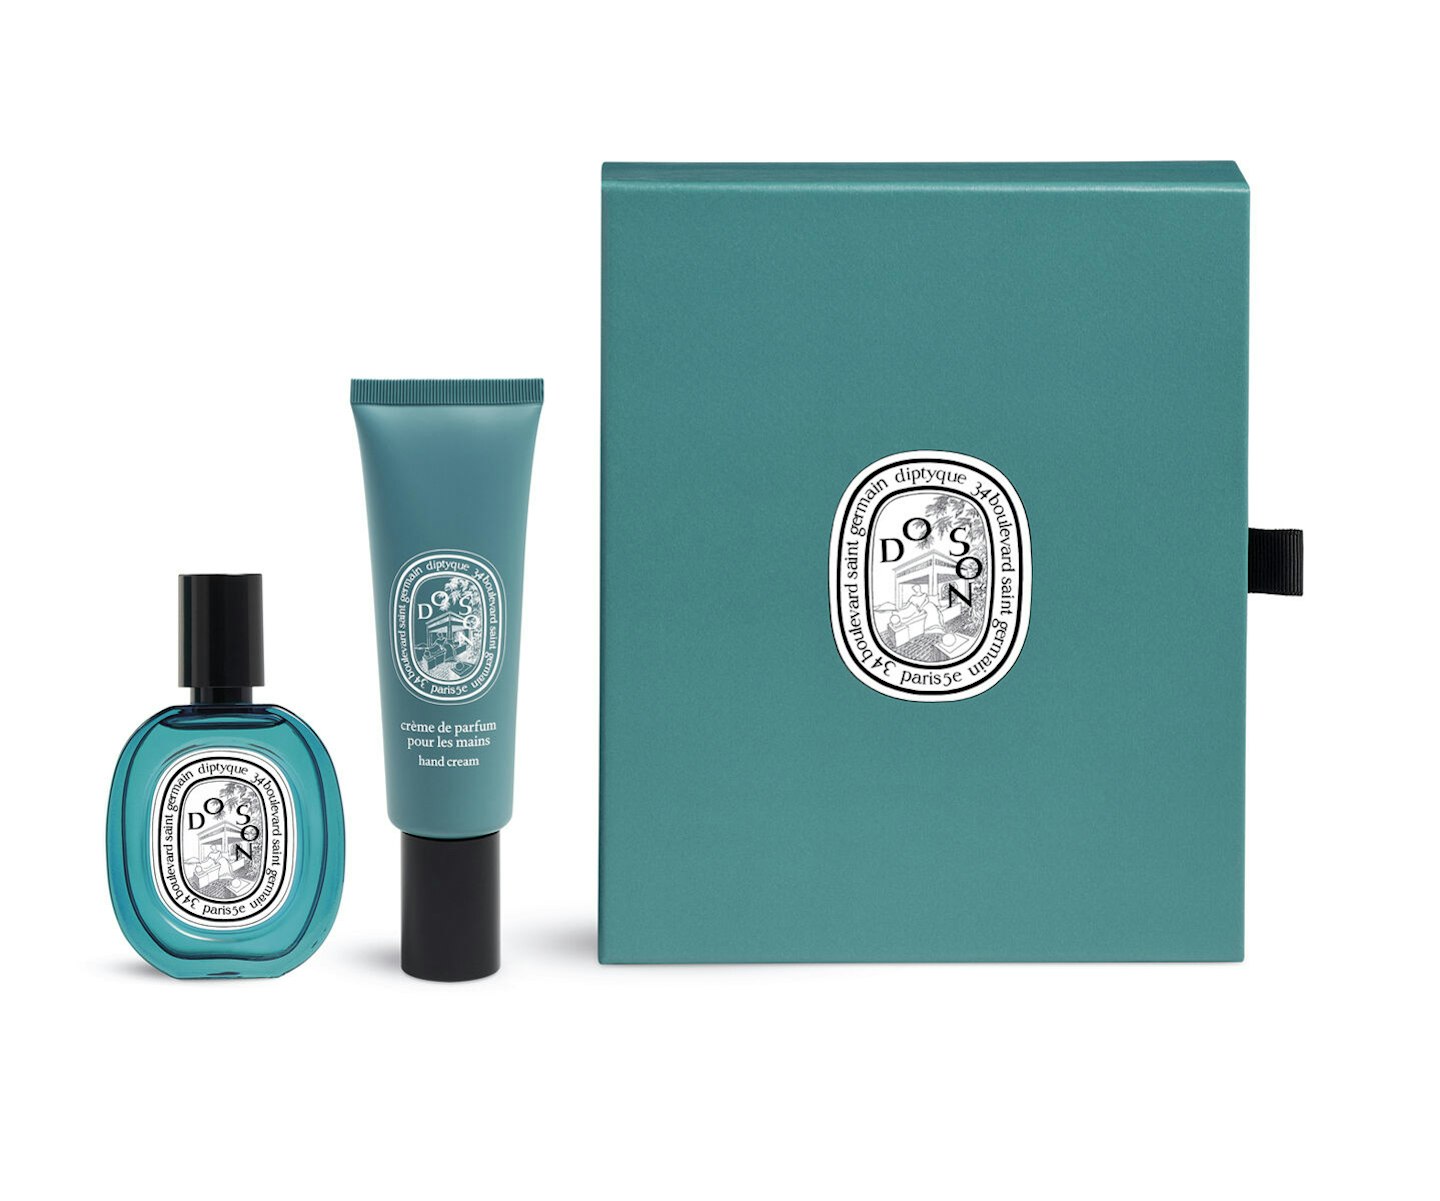 mum to be gifts Diptyque, Do Son Eau De Toilette And Hand Cream Set, £87